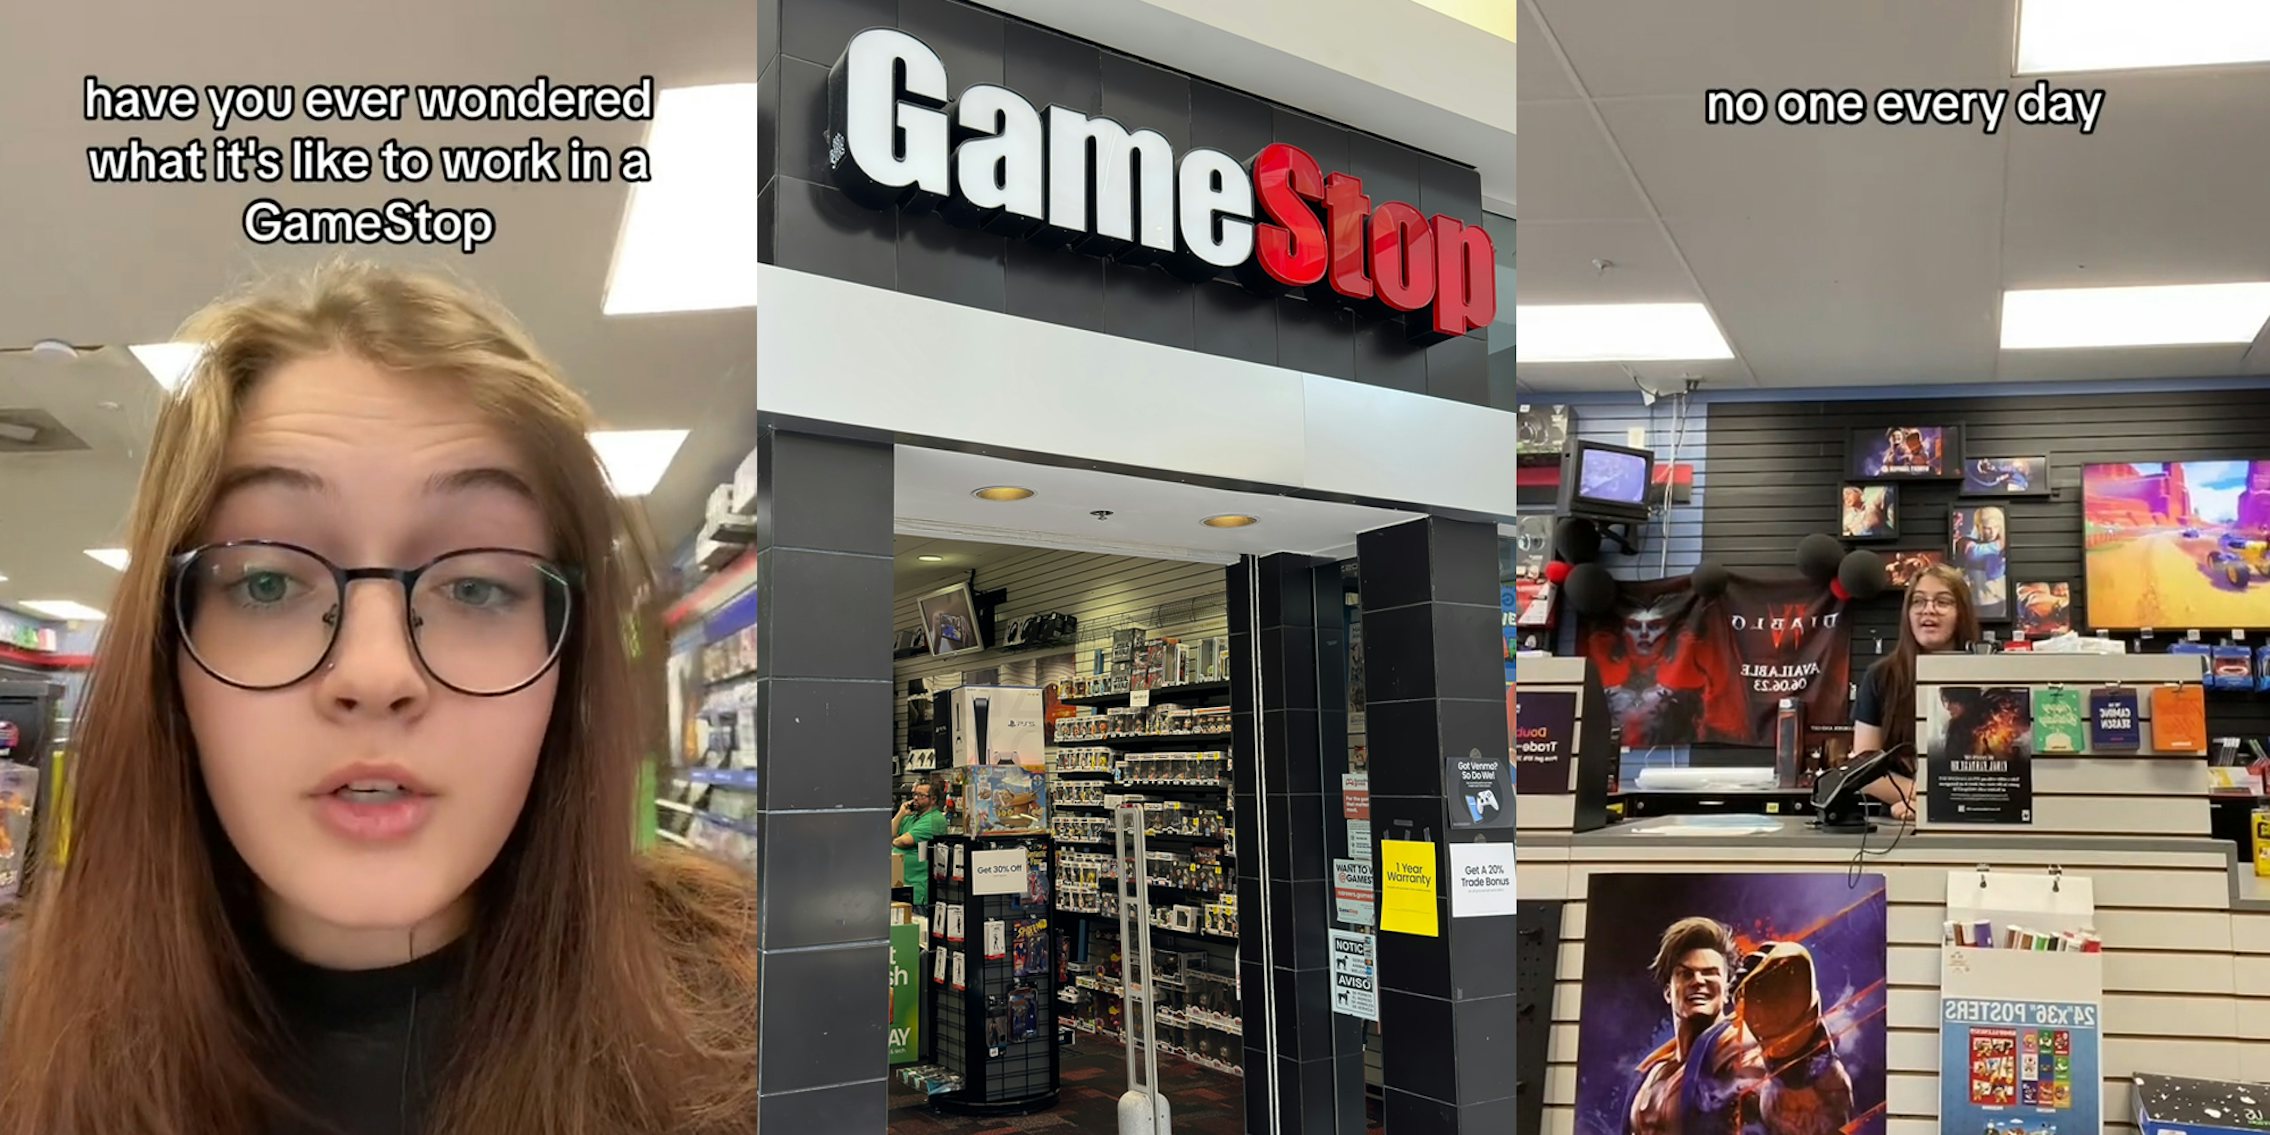 GameStop Worker Says No One Comes In All Day